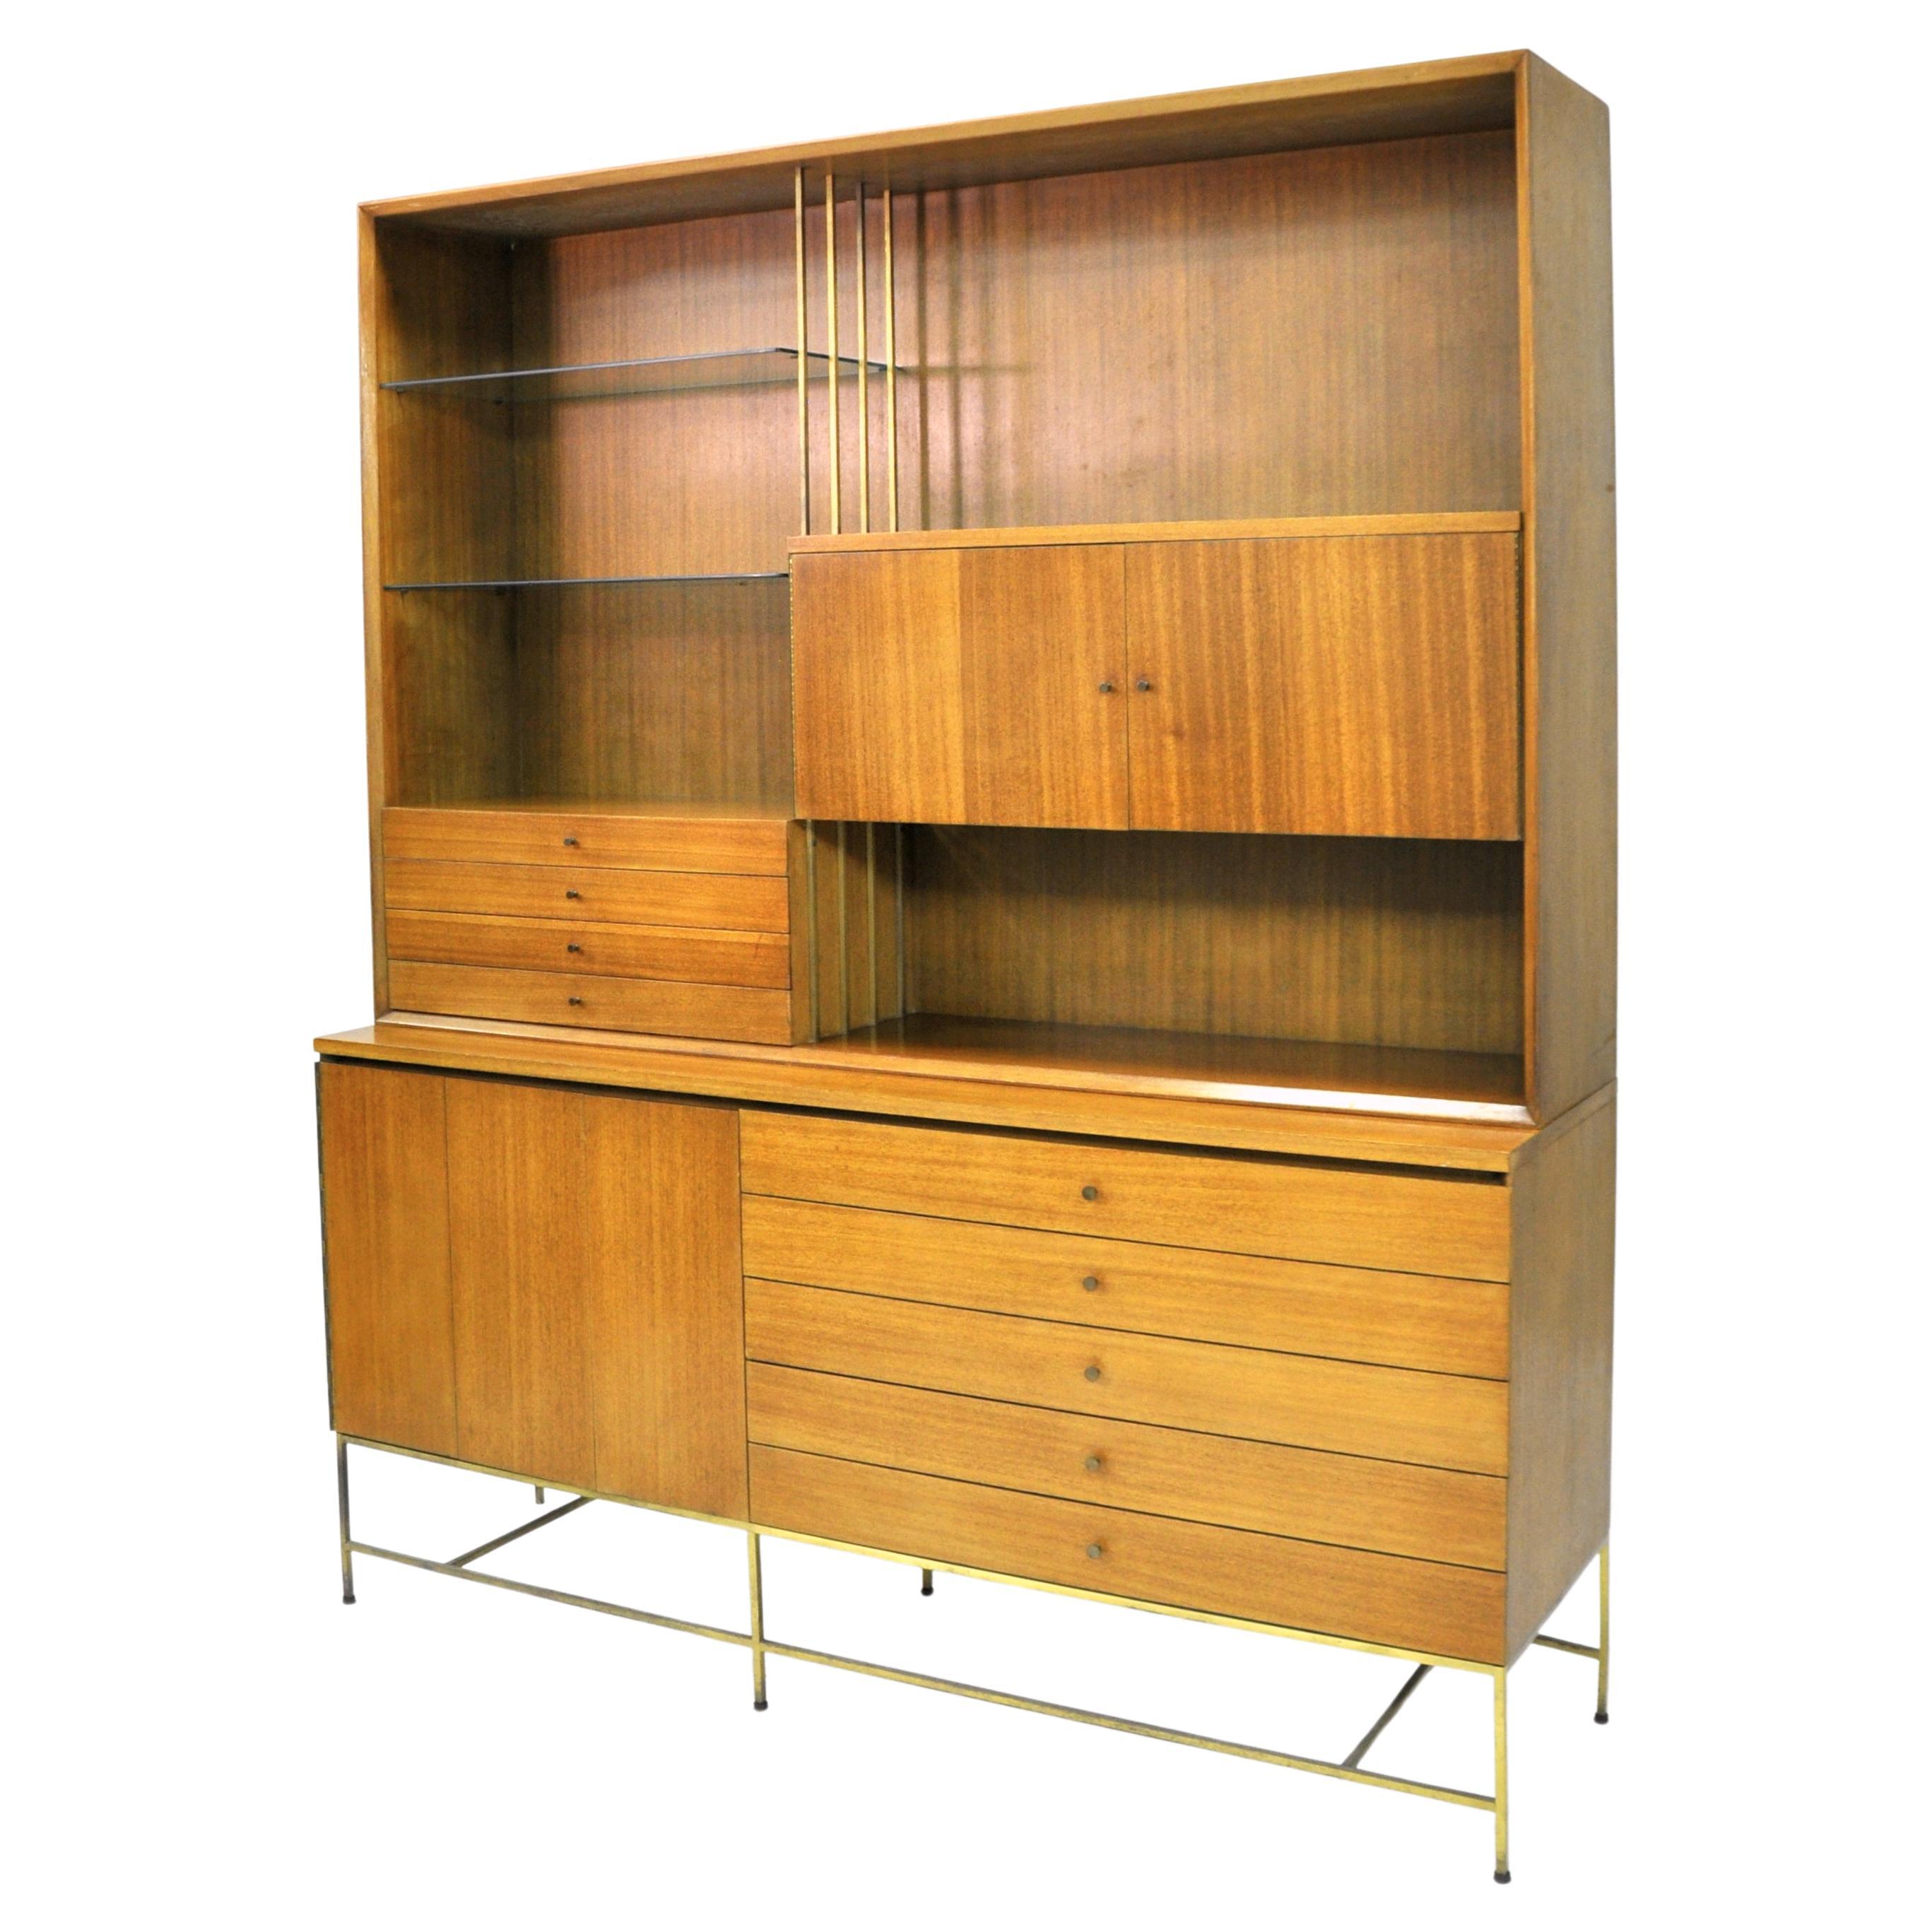 All original Paul McCobb mahogany and brass cabinet model C8506 with breakfront top model C8006, from the Irwin Collection by Calvin Furniture, which is part of the work the designer created for Directional. The two piece mid-century modern credenza